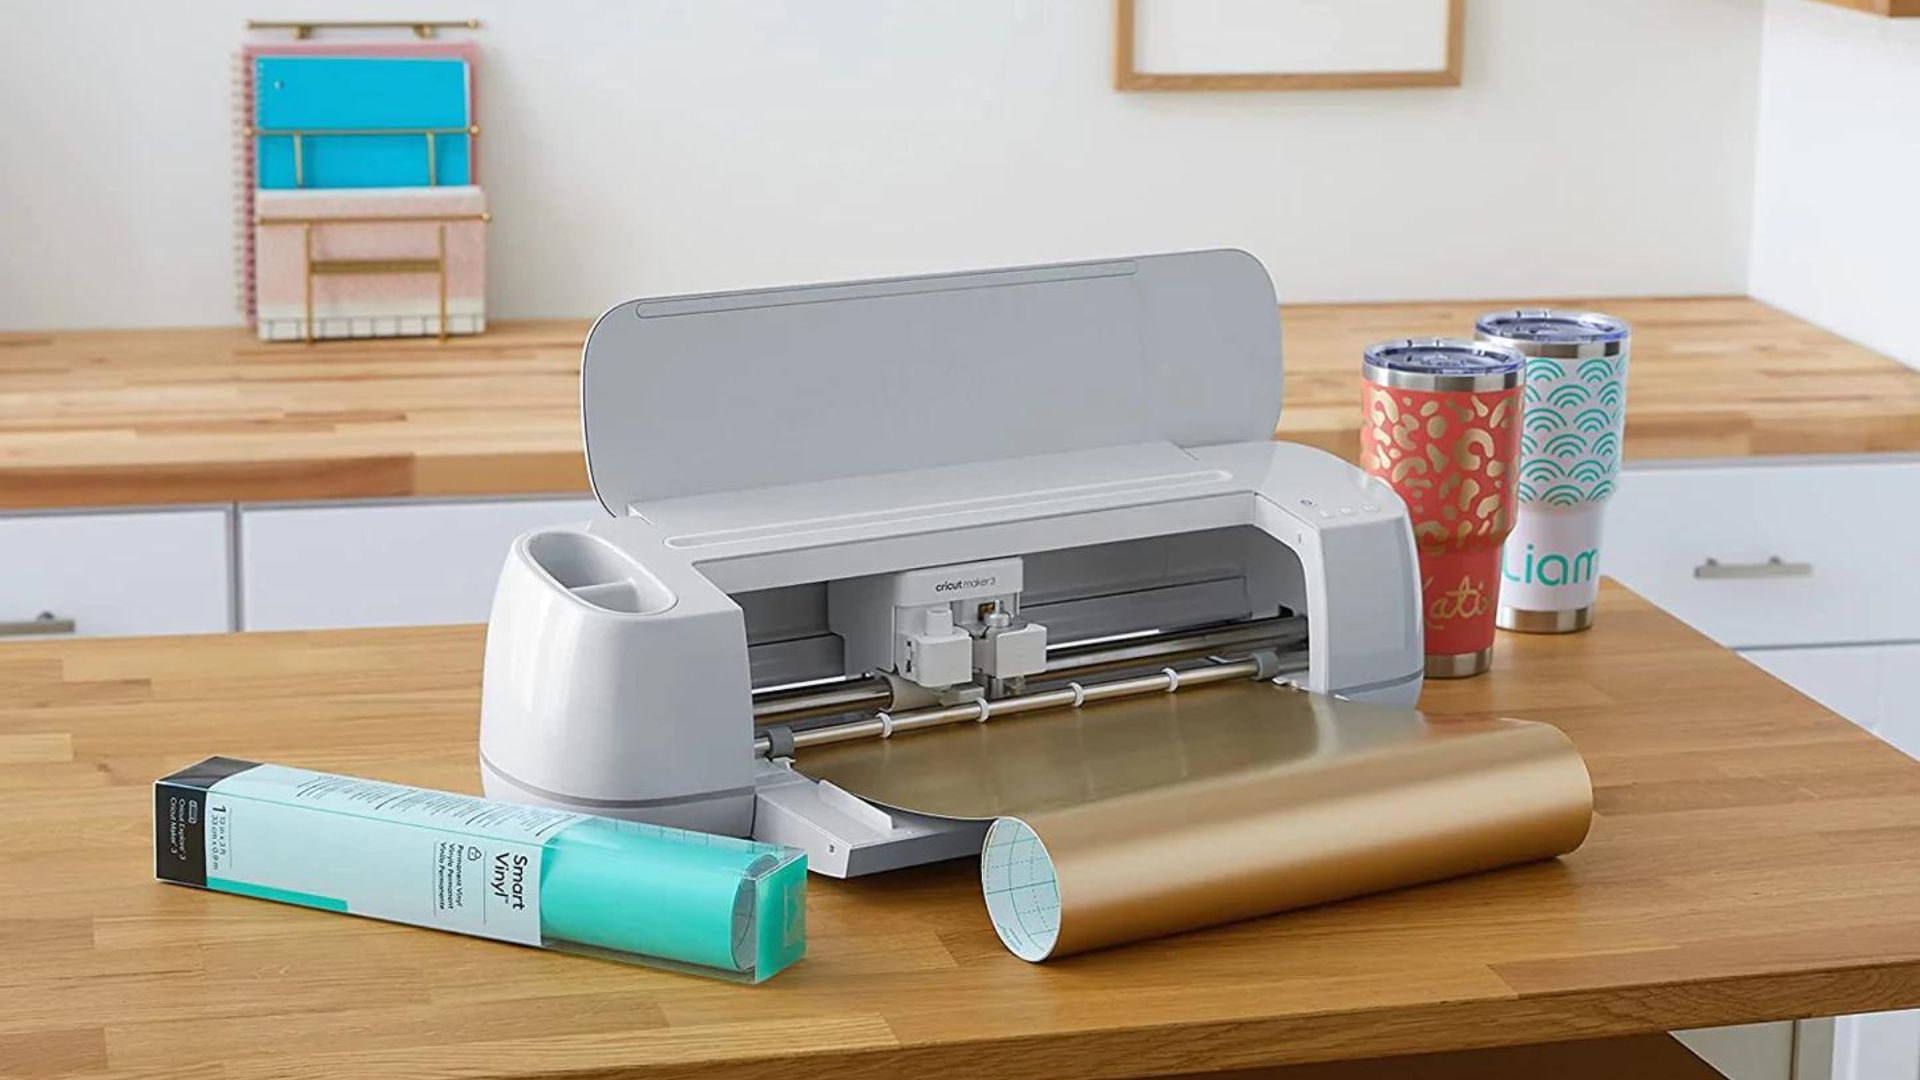 Cricut Maker 3: Review and an Easy Beginner's Project